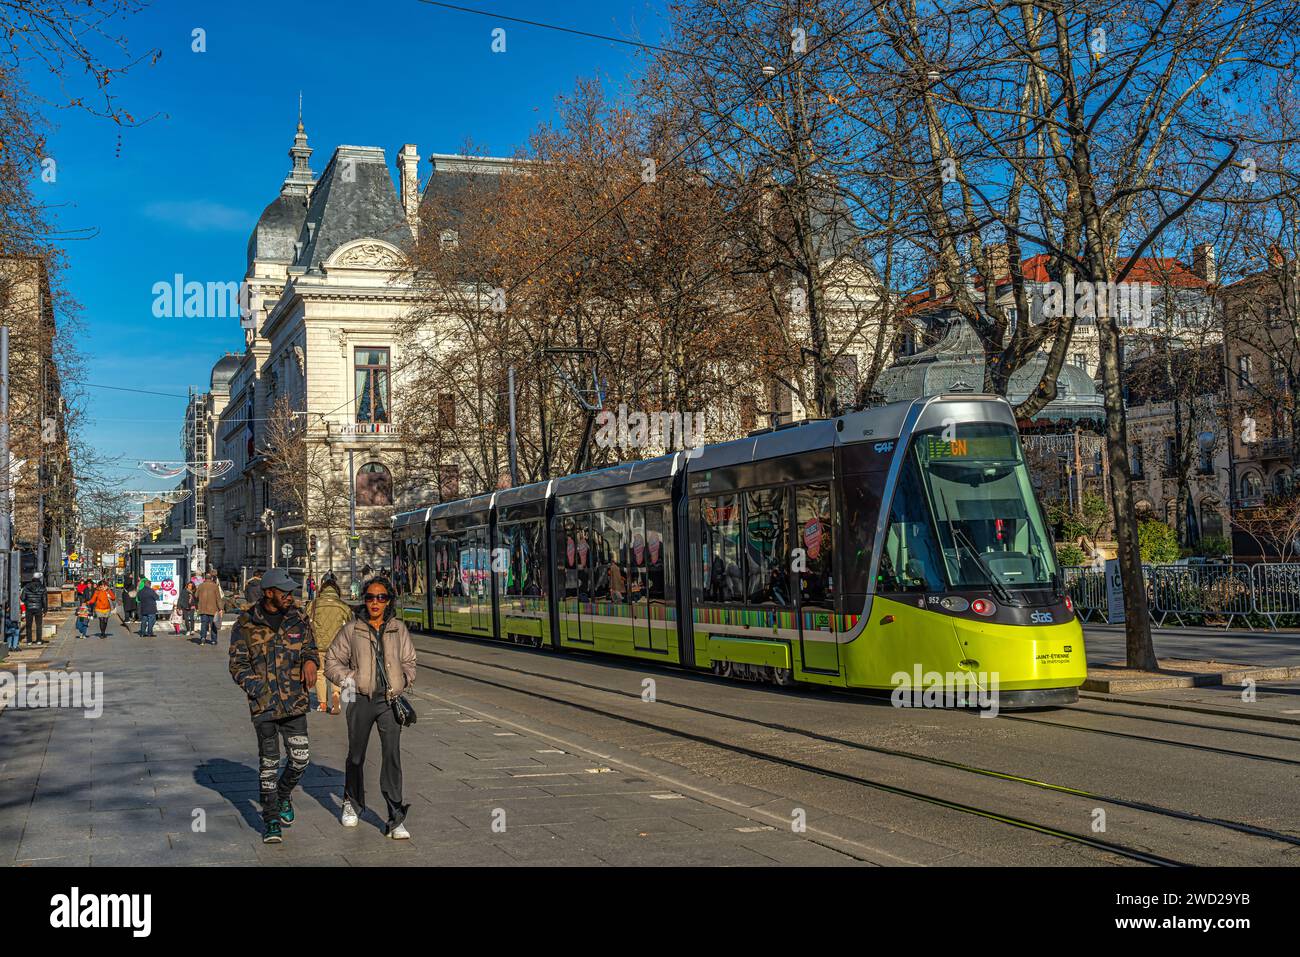 The yellow light rail train in Jean Jaures square on a sunny day with tourists and locals walking. Saint-Étienne, Auvergne-Rhône-Alpes region, France Stock Photo